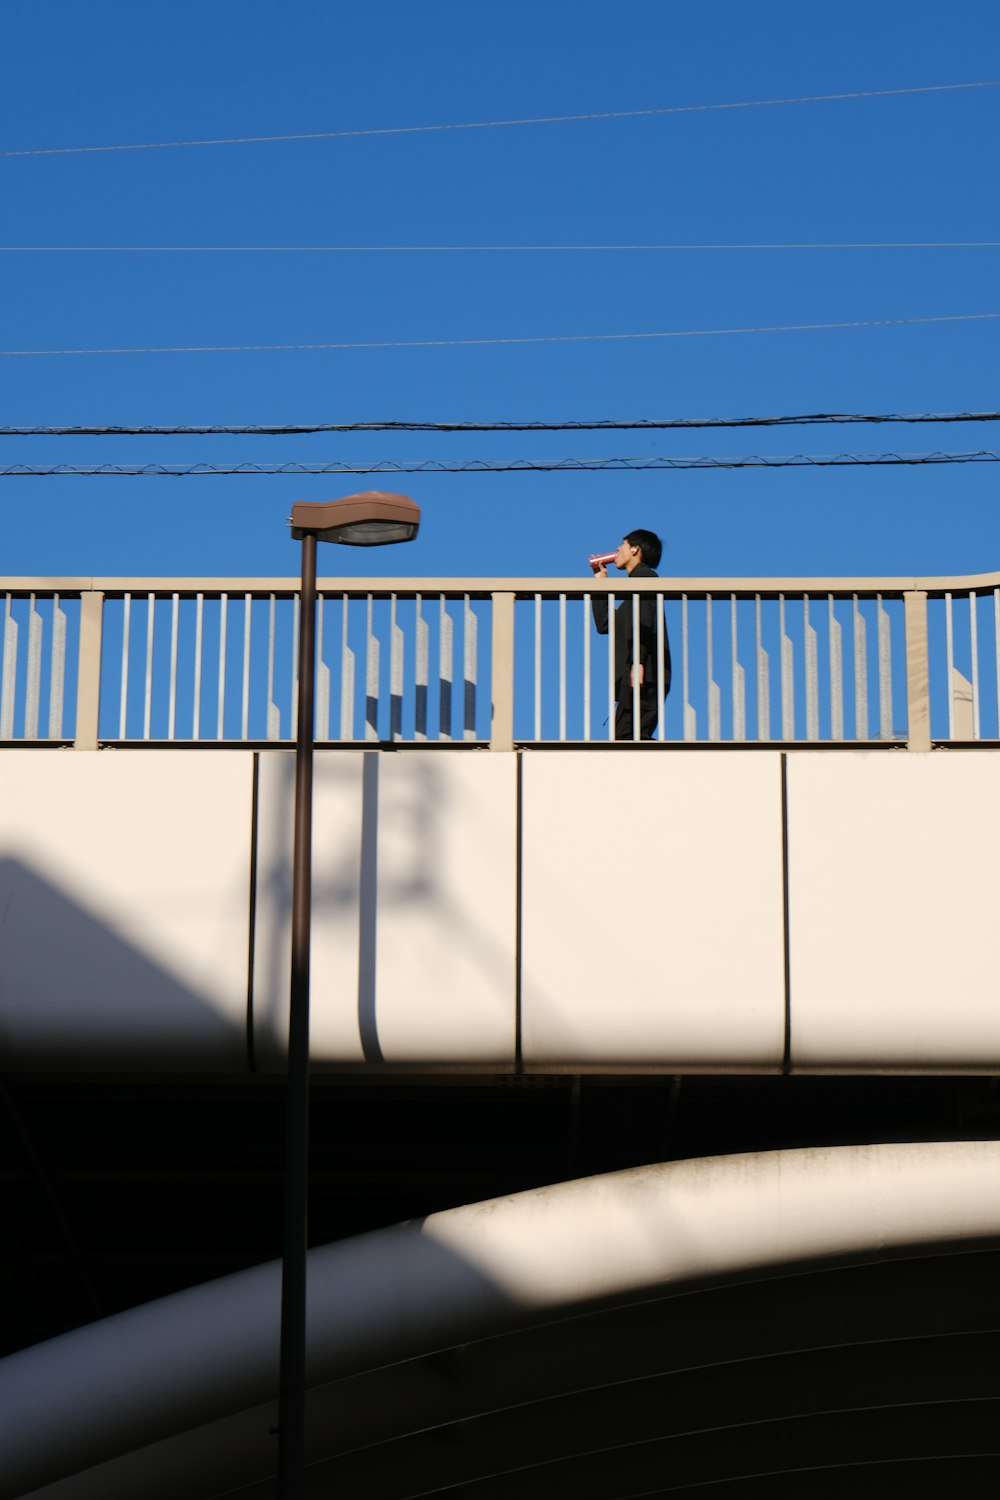 a person standing on a bridge with a cell phone